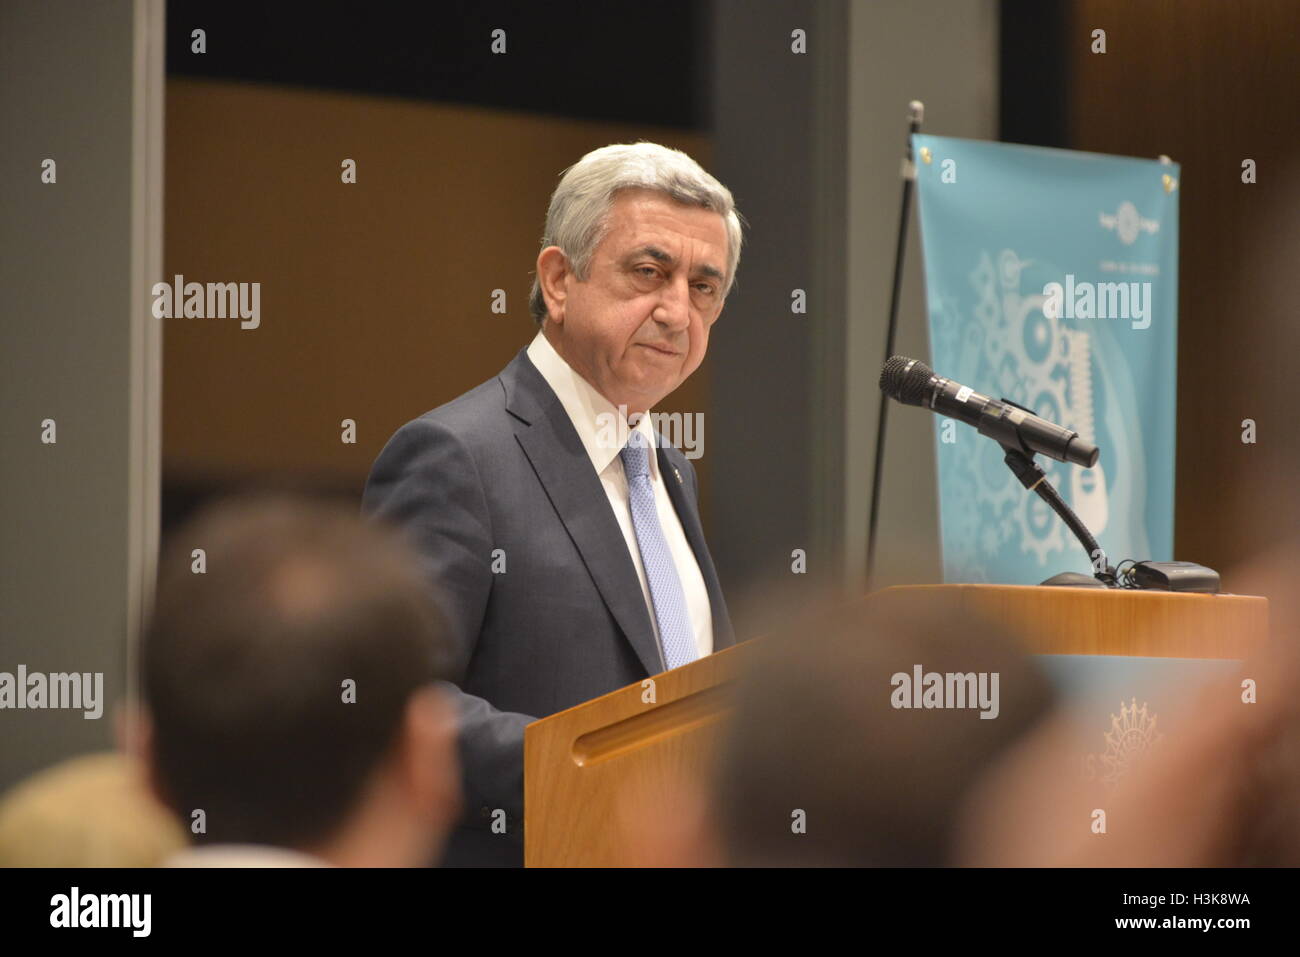 Cambridge, Massachusetts, USA. 29th Mar, 2016. Armenian President SERGE SARGSYAN speaking at the Samberg Center of the Massachusetts Institute of Technology (MIT) for the LUYS FOUNDATION gala evening. © Kenneth Martin/ZUMA Wire/Alamy Live News Stock Photo